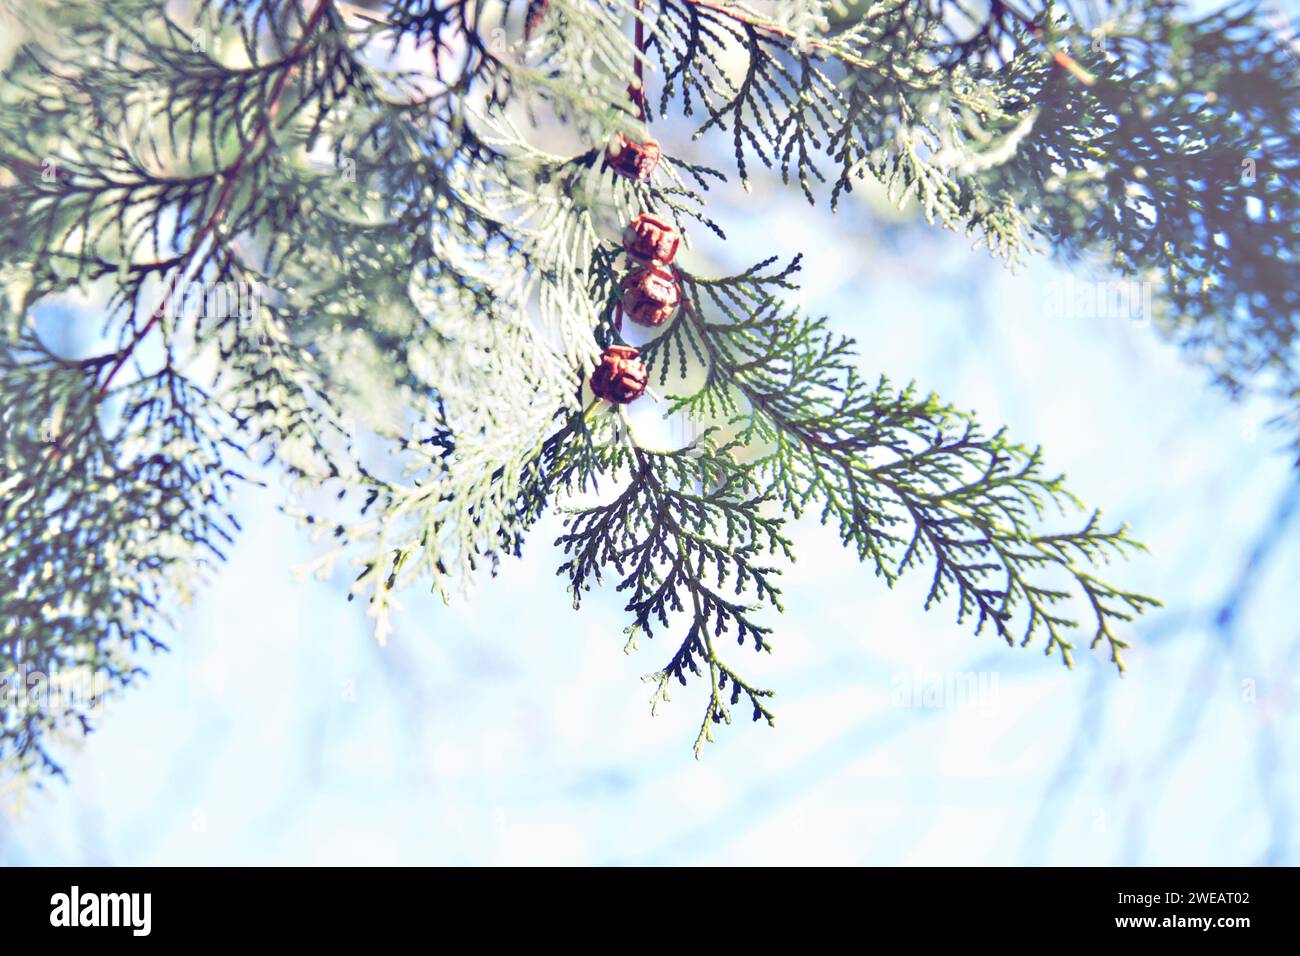 A close-up of an arborvitae branch with cones against a light-blue sky. Stock Photo